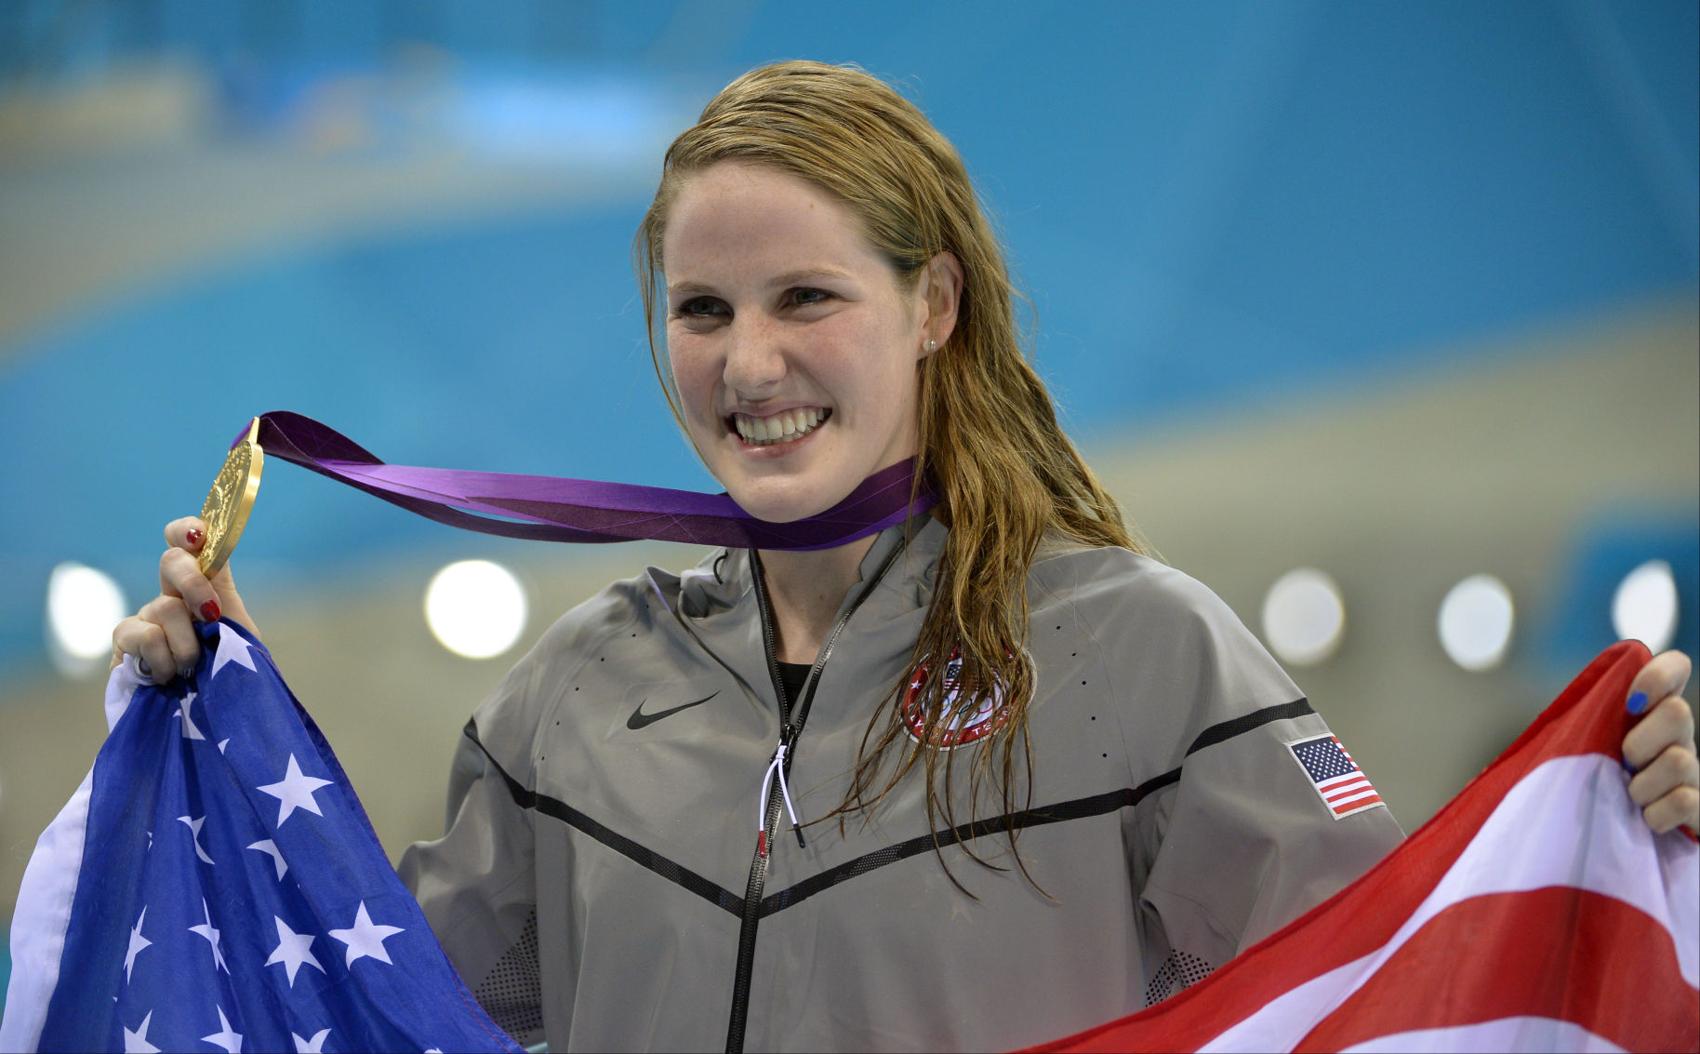 Olympic Swimming Champion Missy Franklin Announces Retirement at Age 23